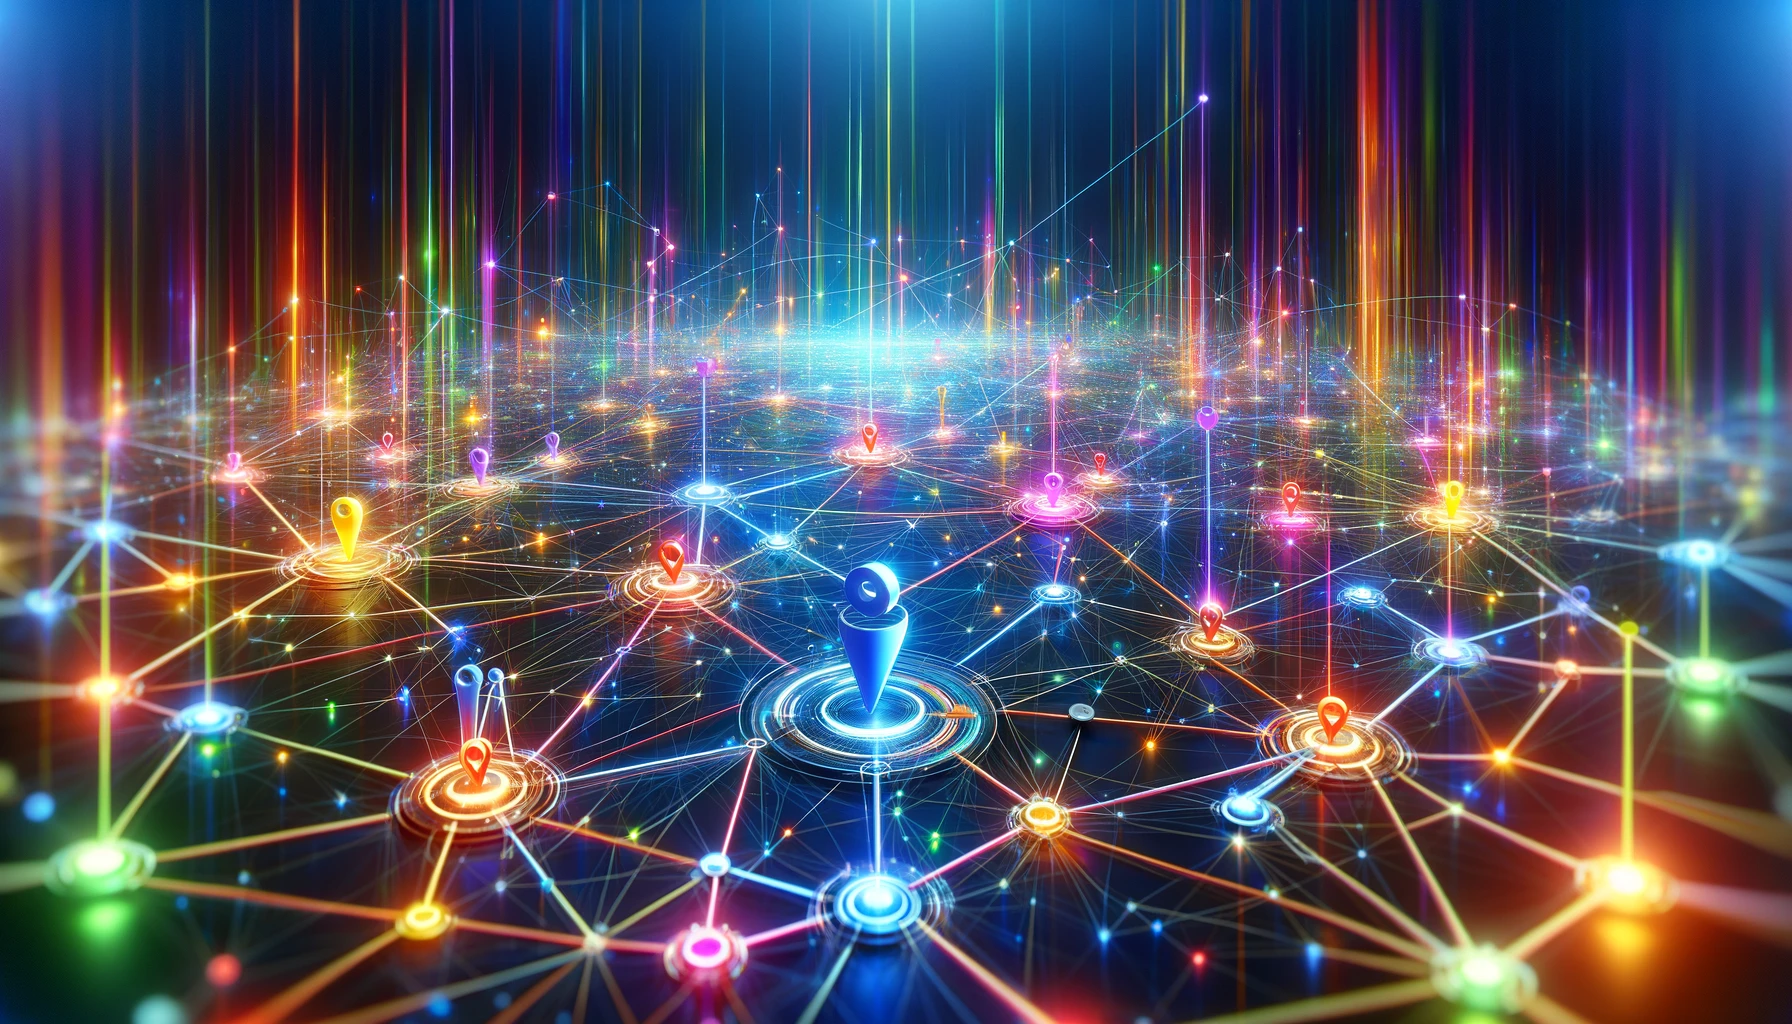 An abstract digital landscape illustrating the concept of SEO Link Building with interconnected nodes and vibrant links.